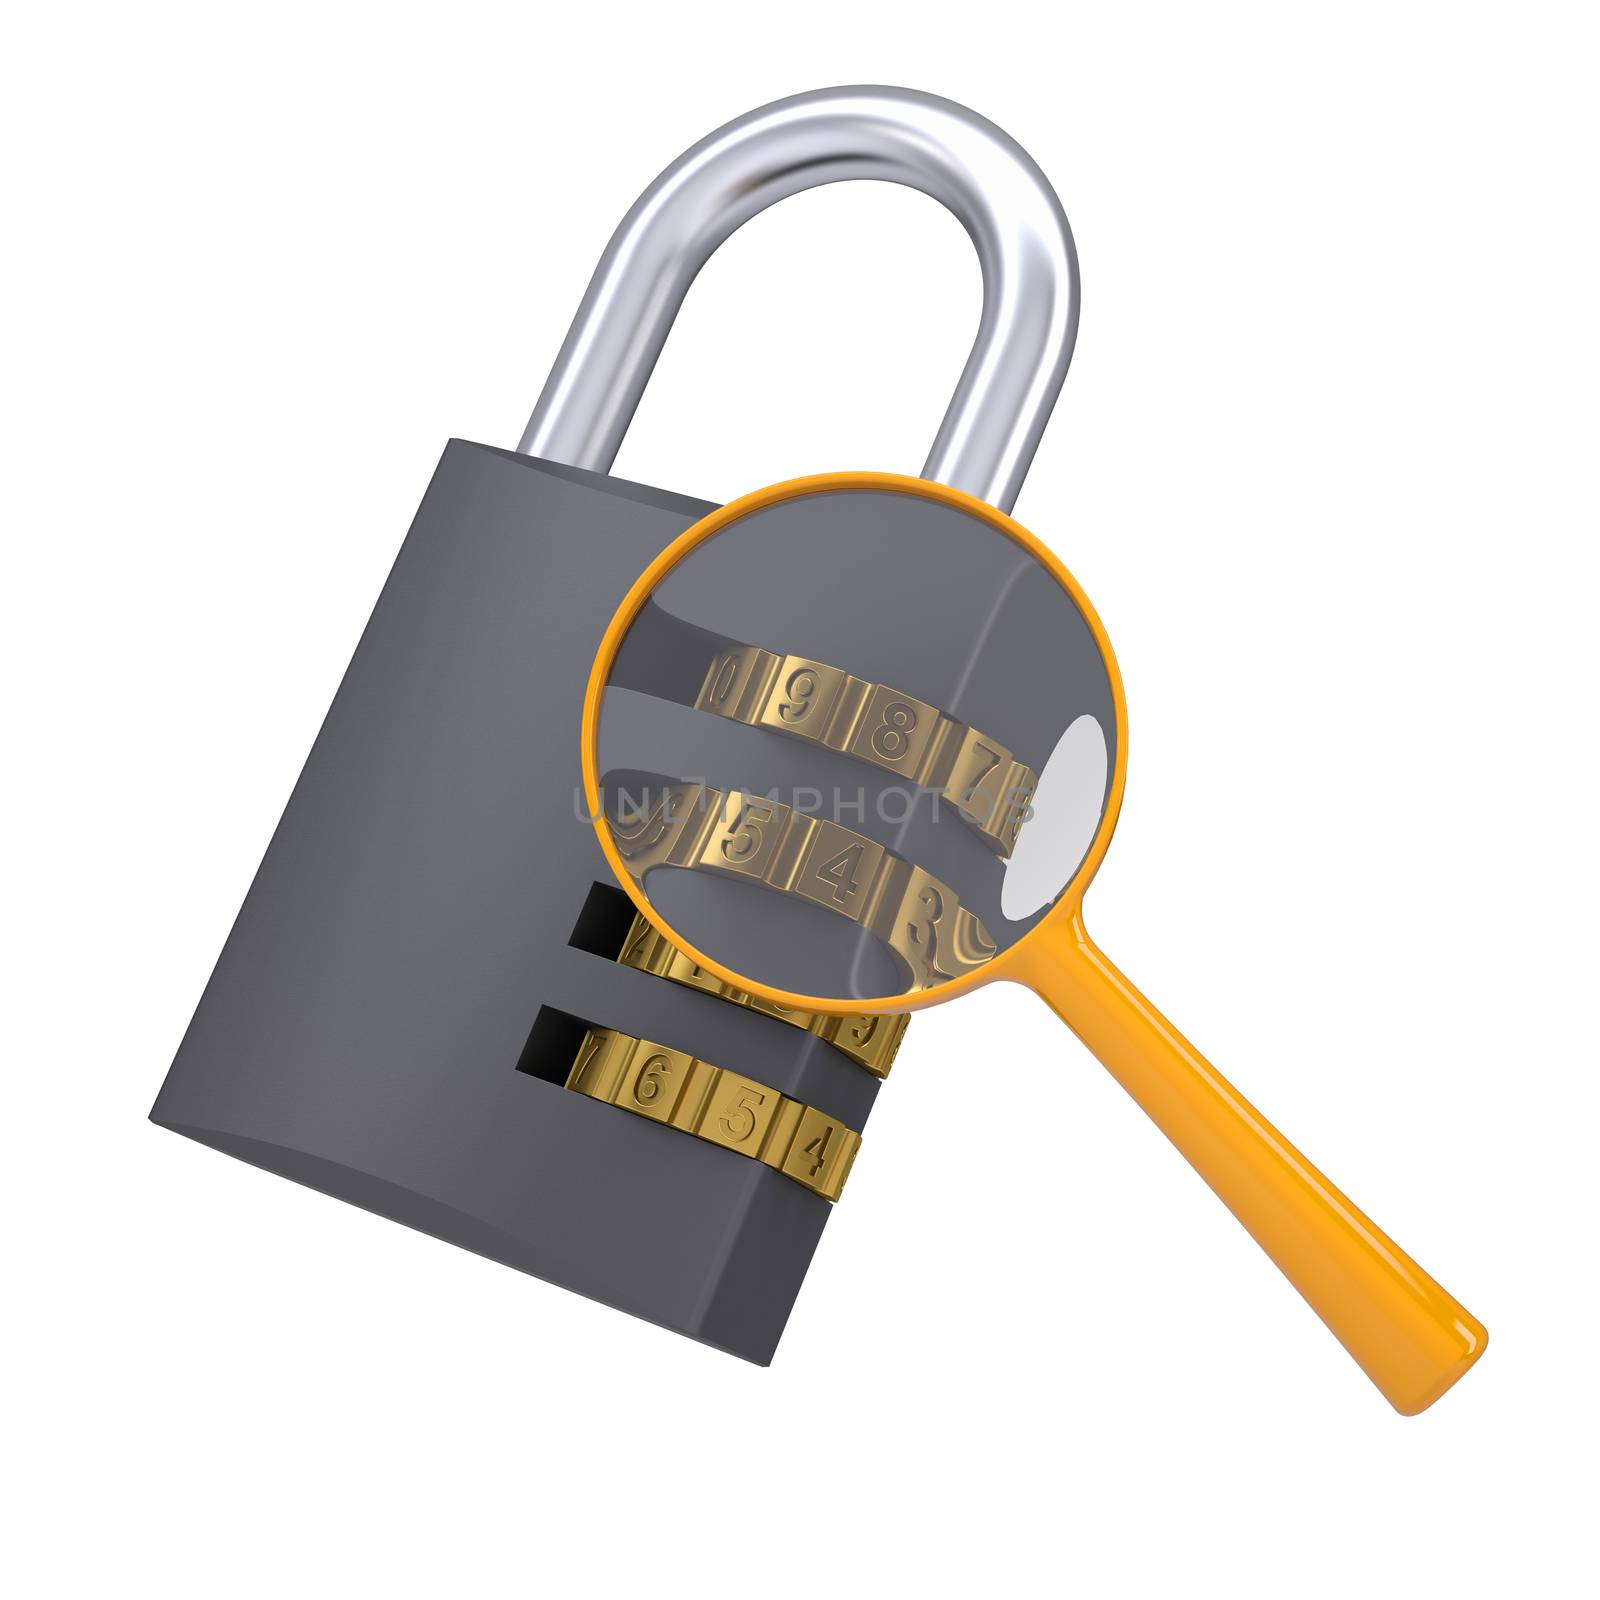 Analysis of security lock code by cherezoff